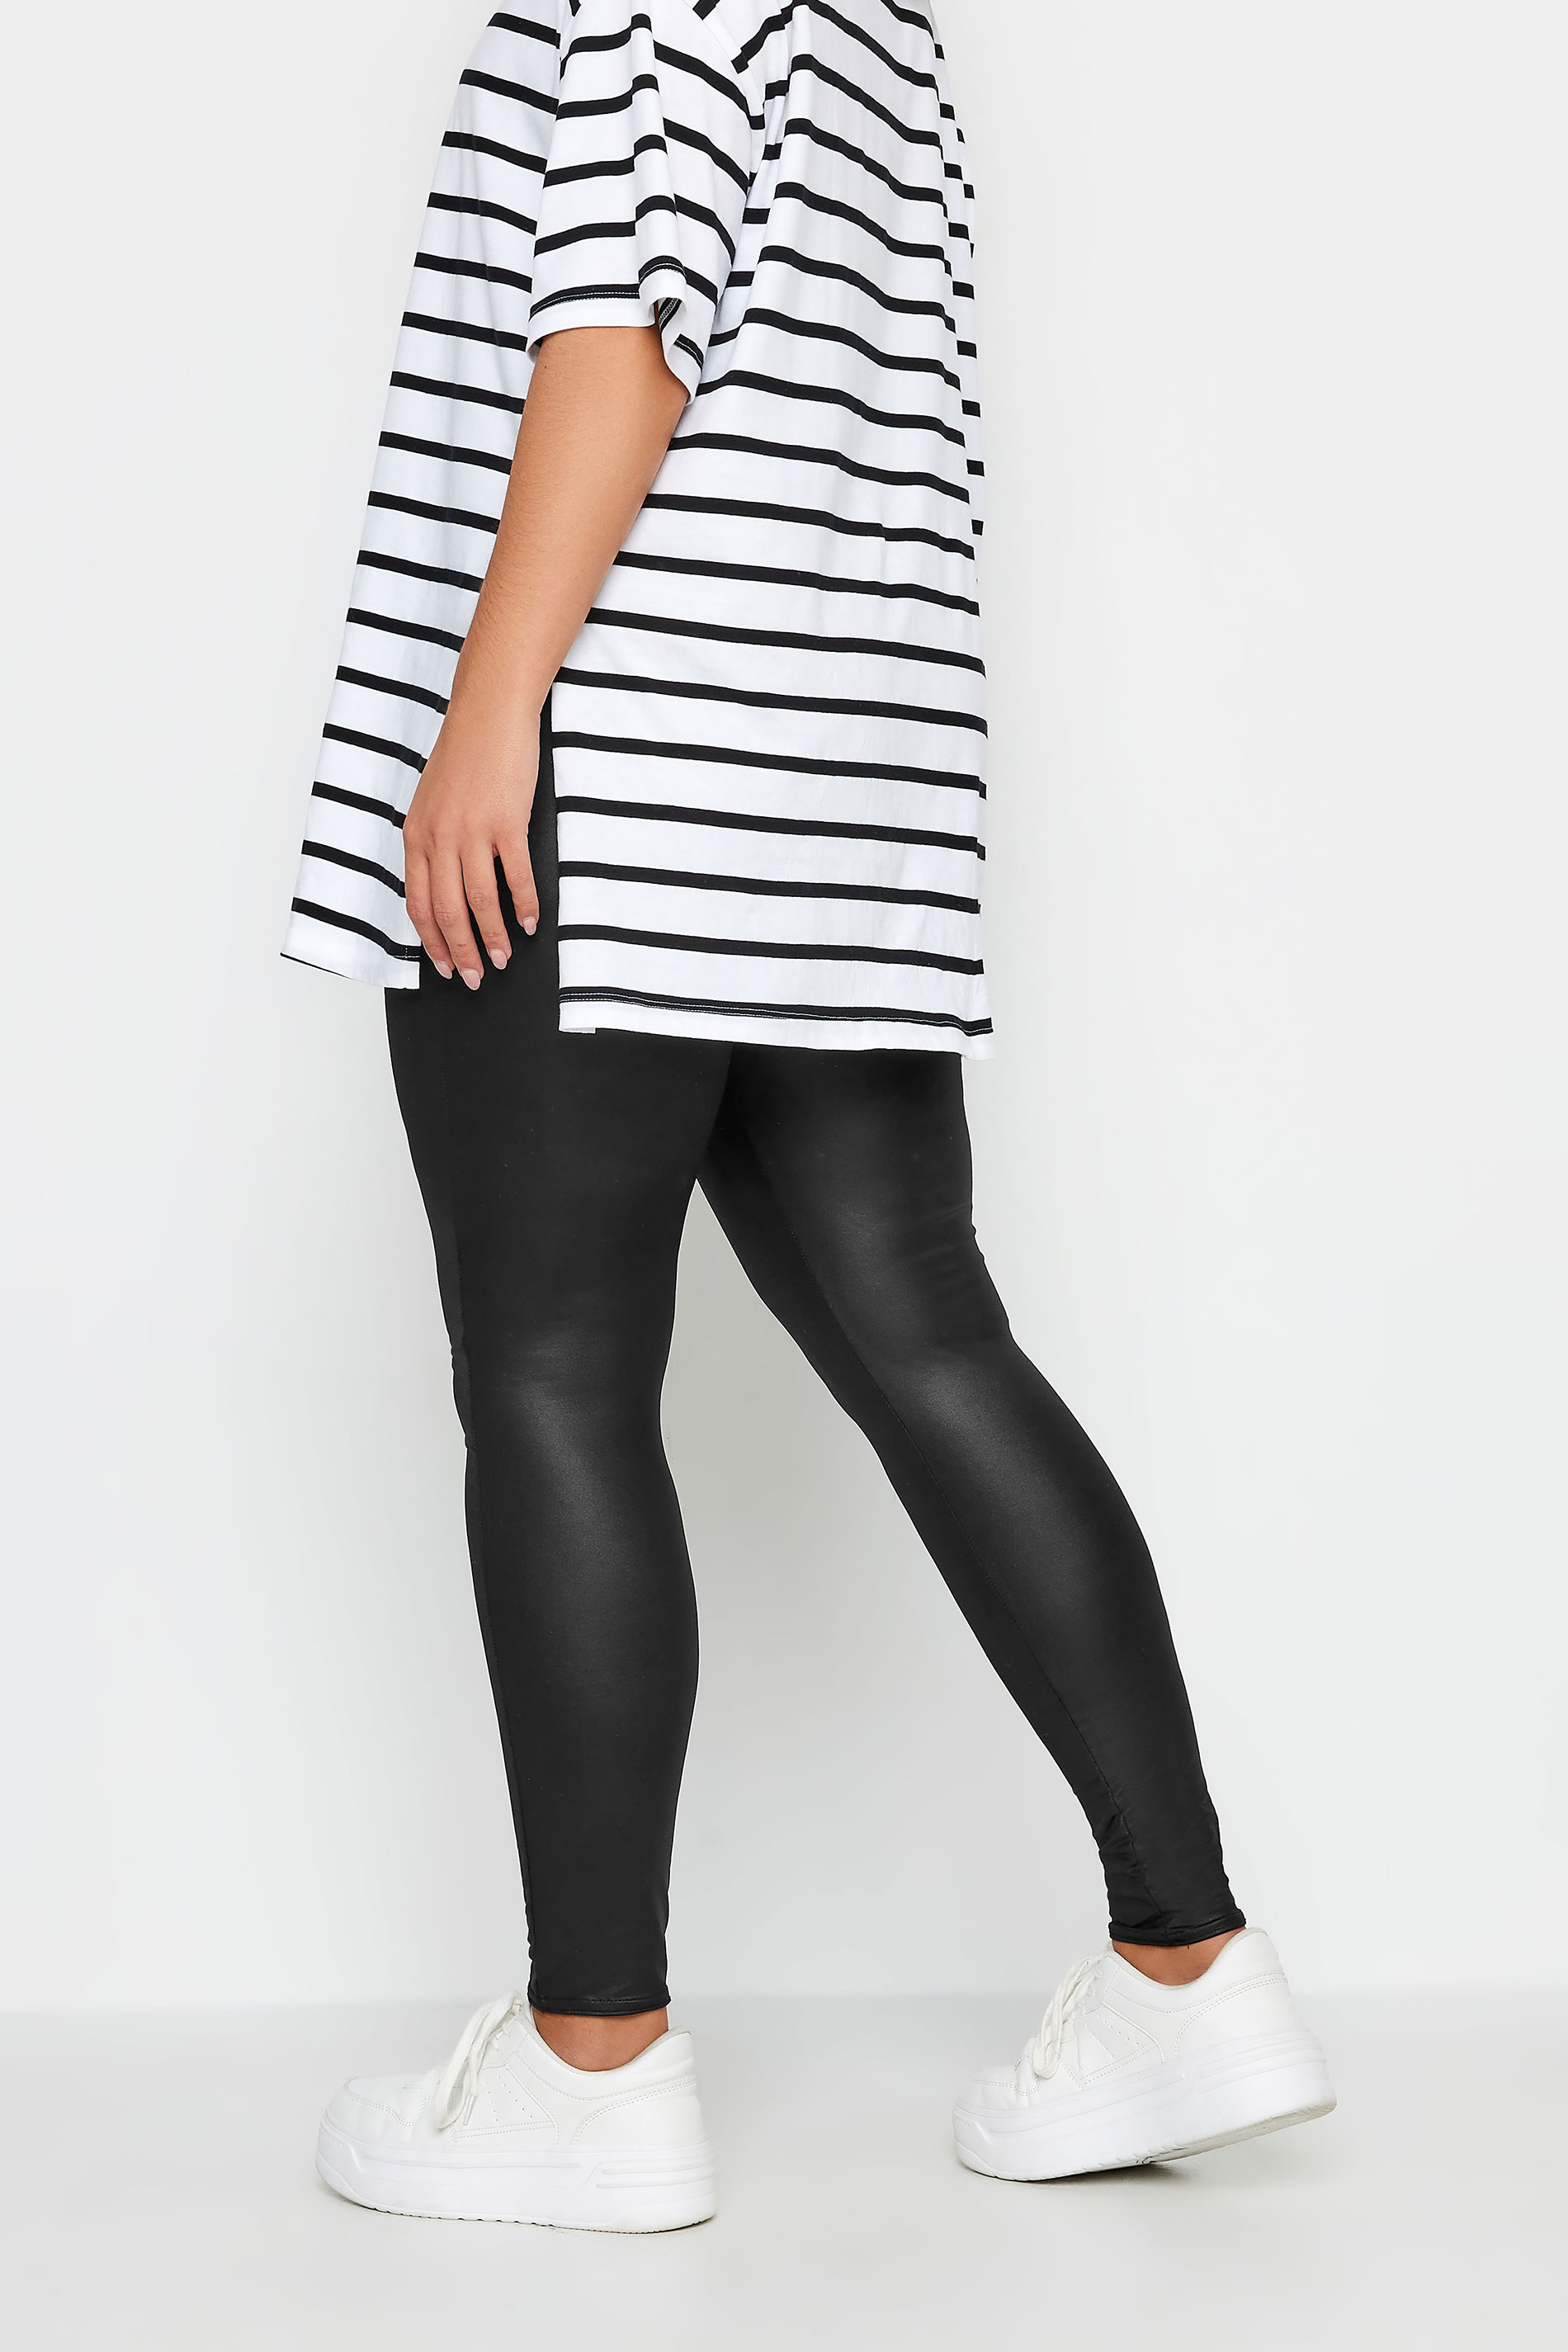 Lux Curves - Look Sexy In Our Shiny Leggings. Comes In 3 Different